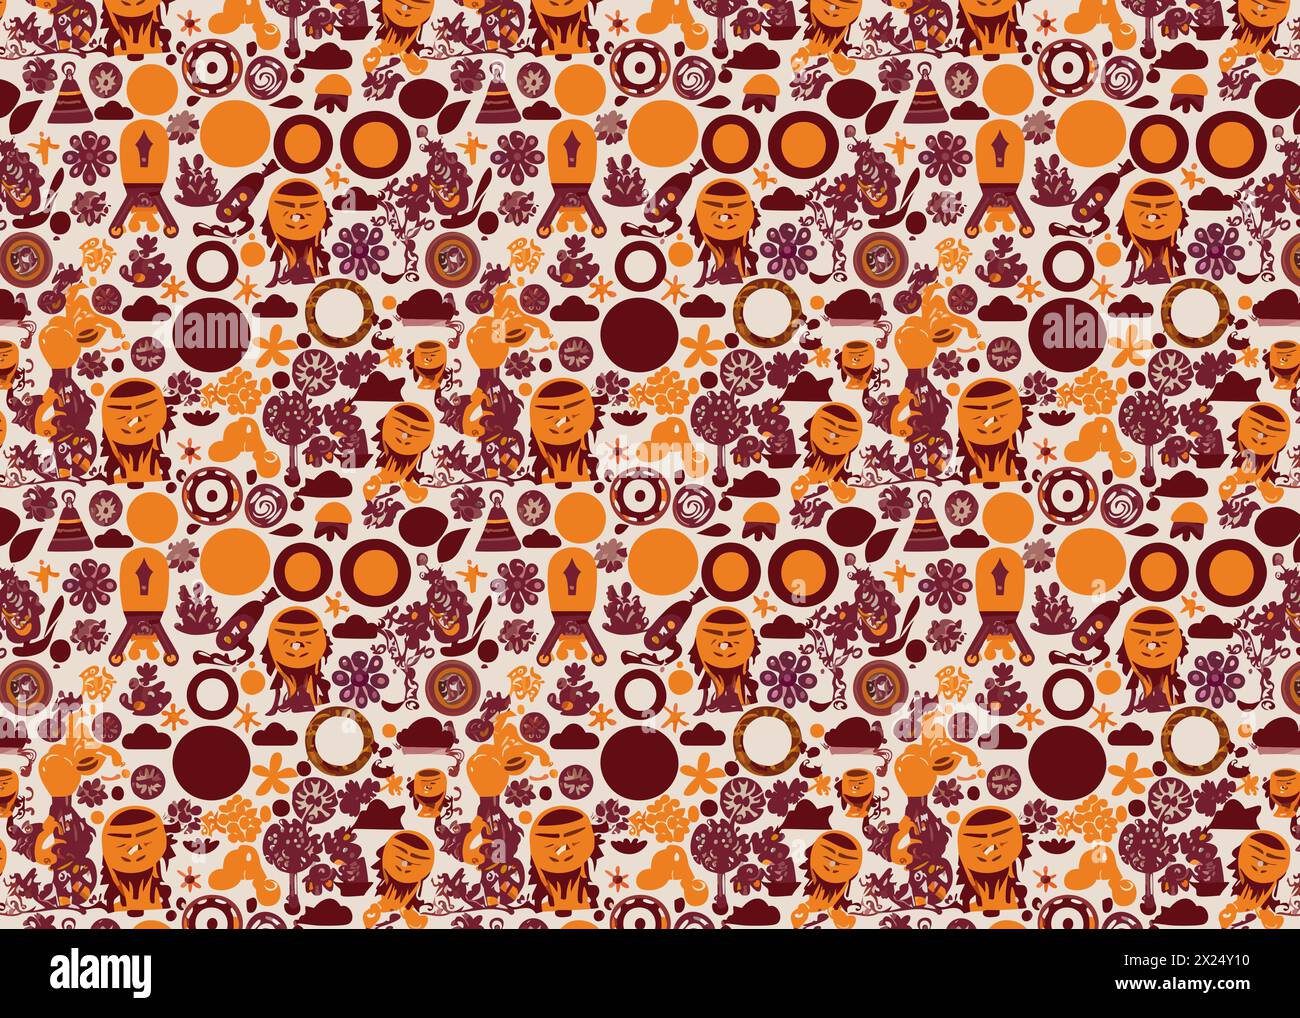 Seamless background pattern with decorative groovy forms Stock Vector